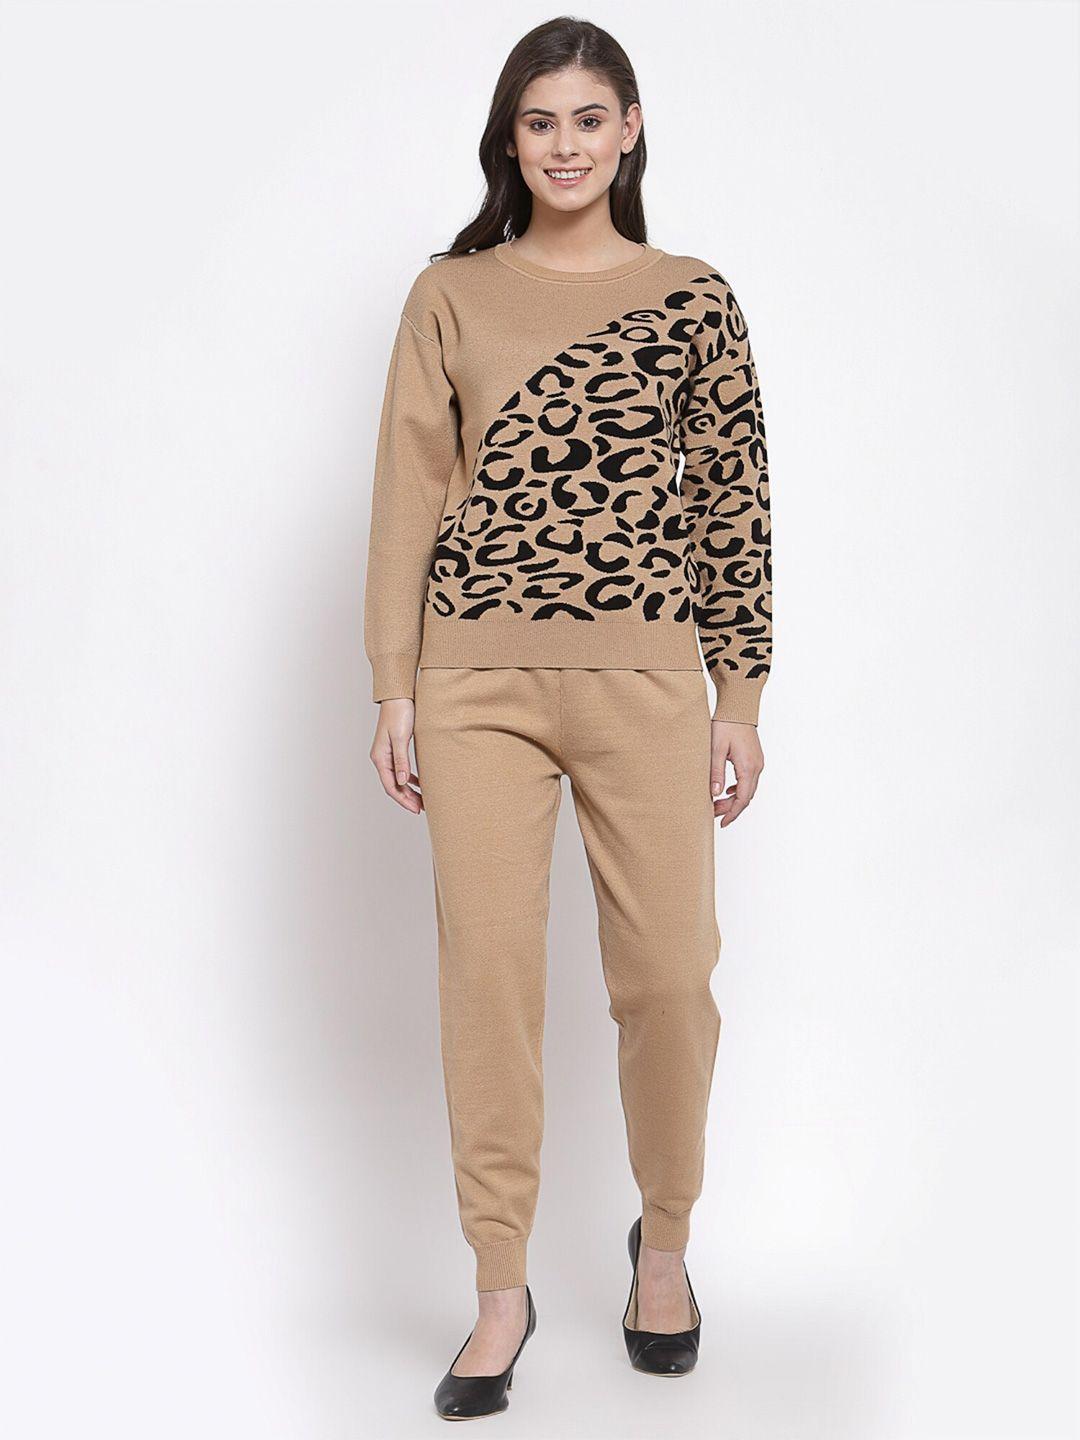 mafadeny women printed top with trousers